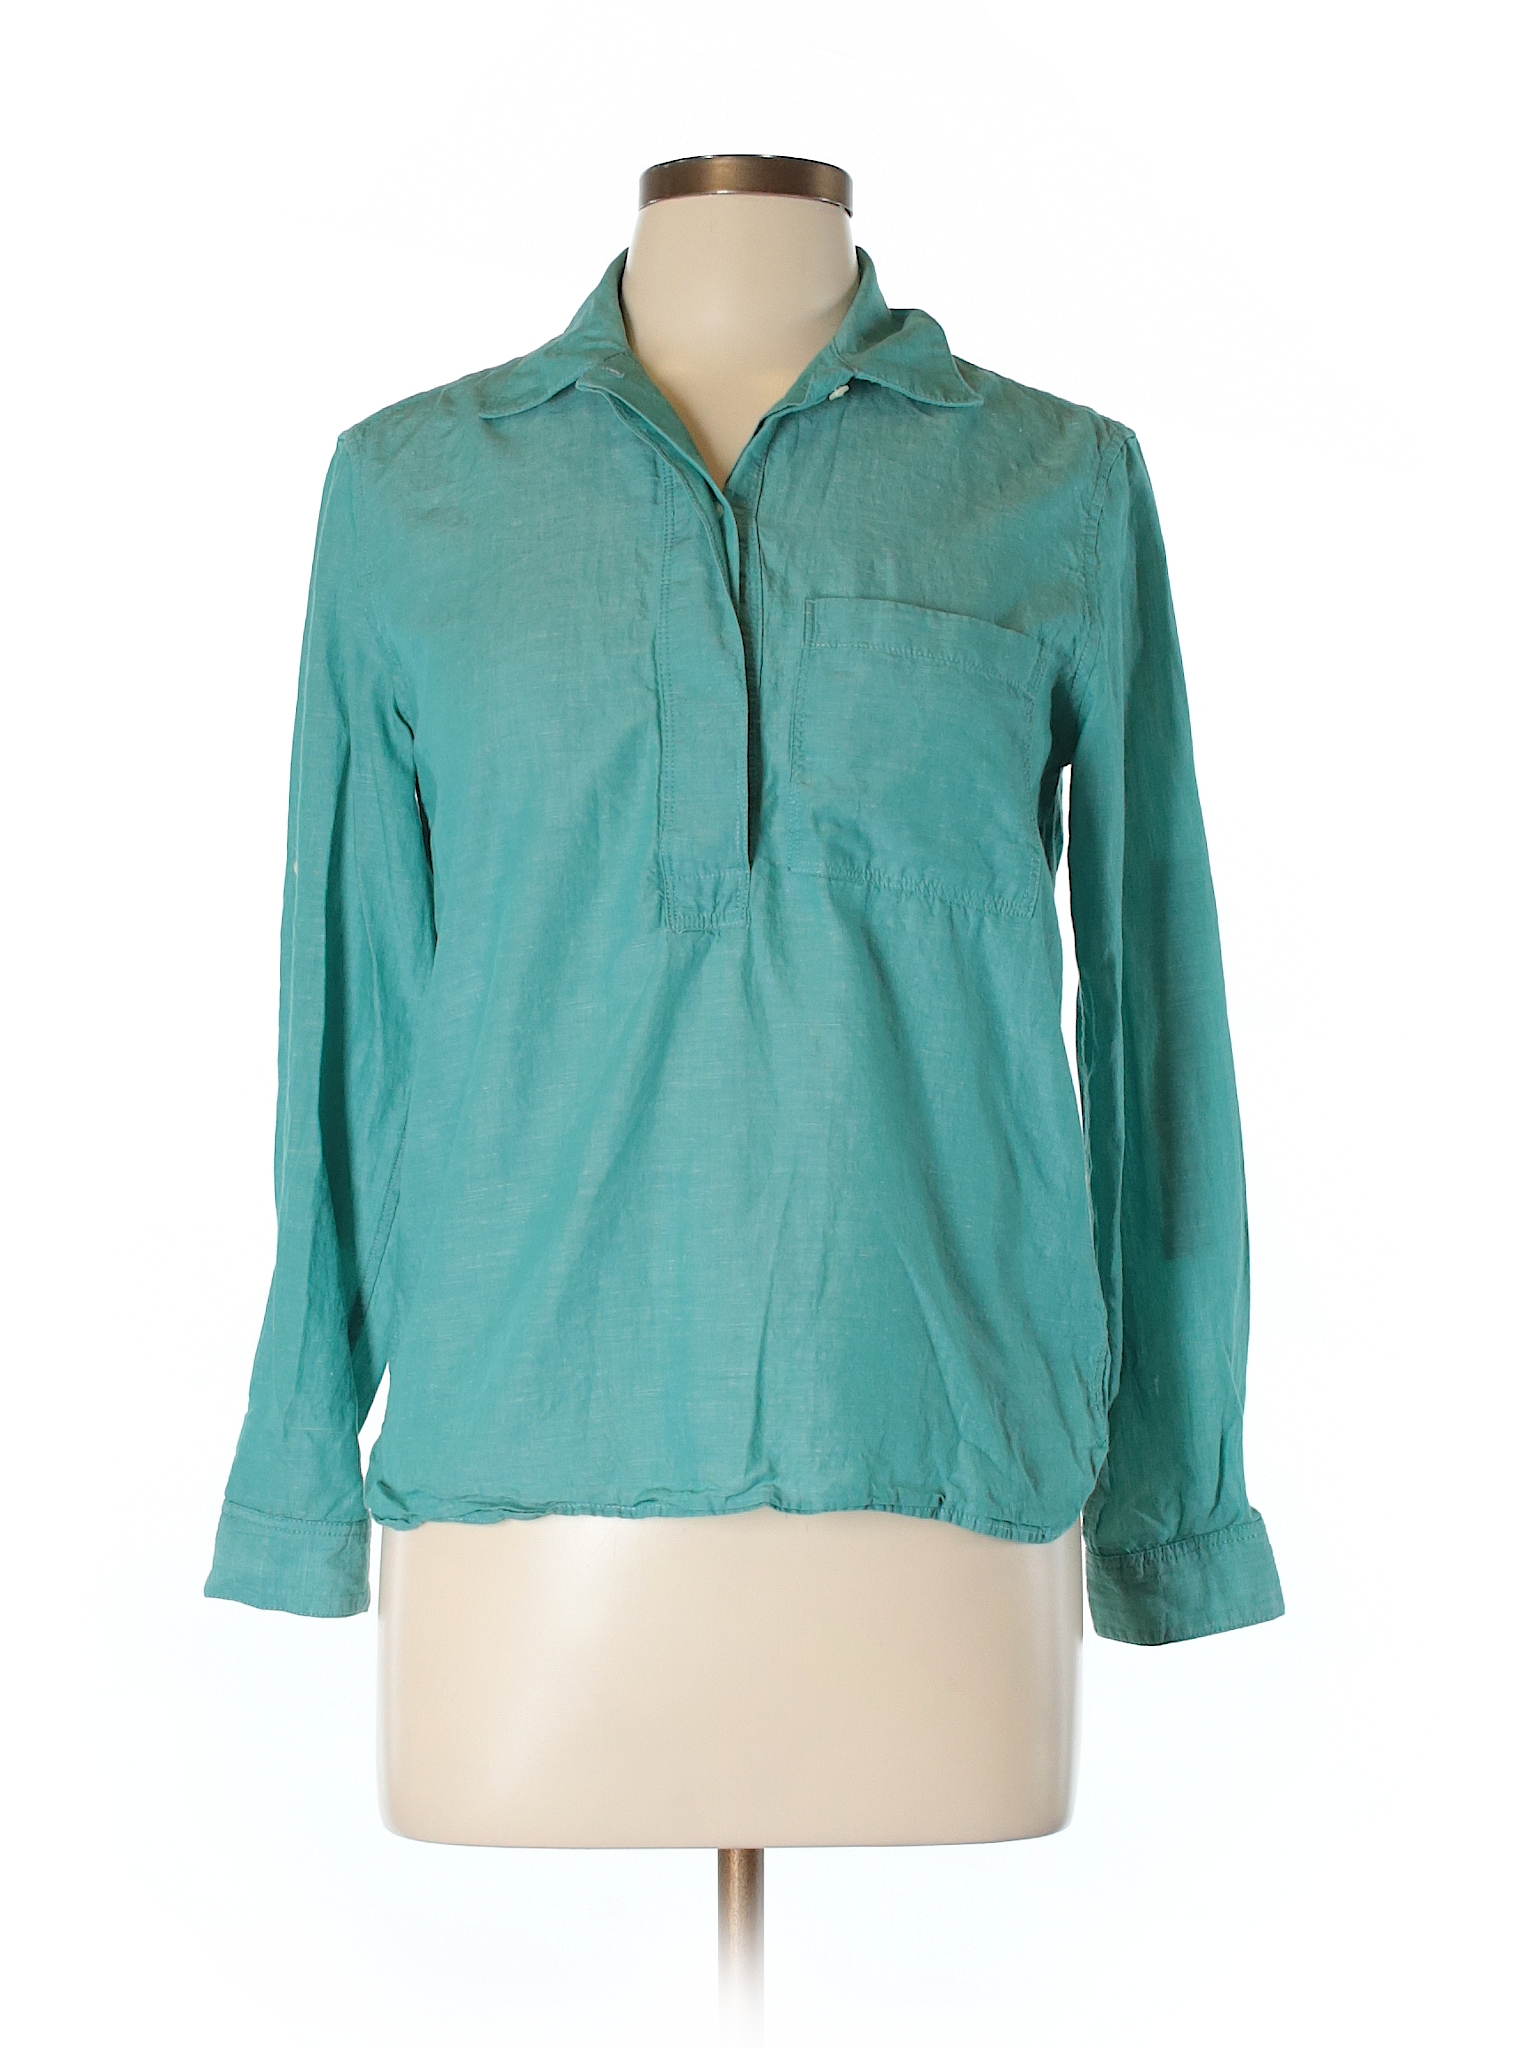 Gap Solid Teal Long Sleeve Button-Down Shirt Size S - 94% off | thredUP